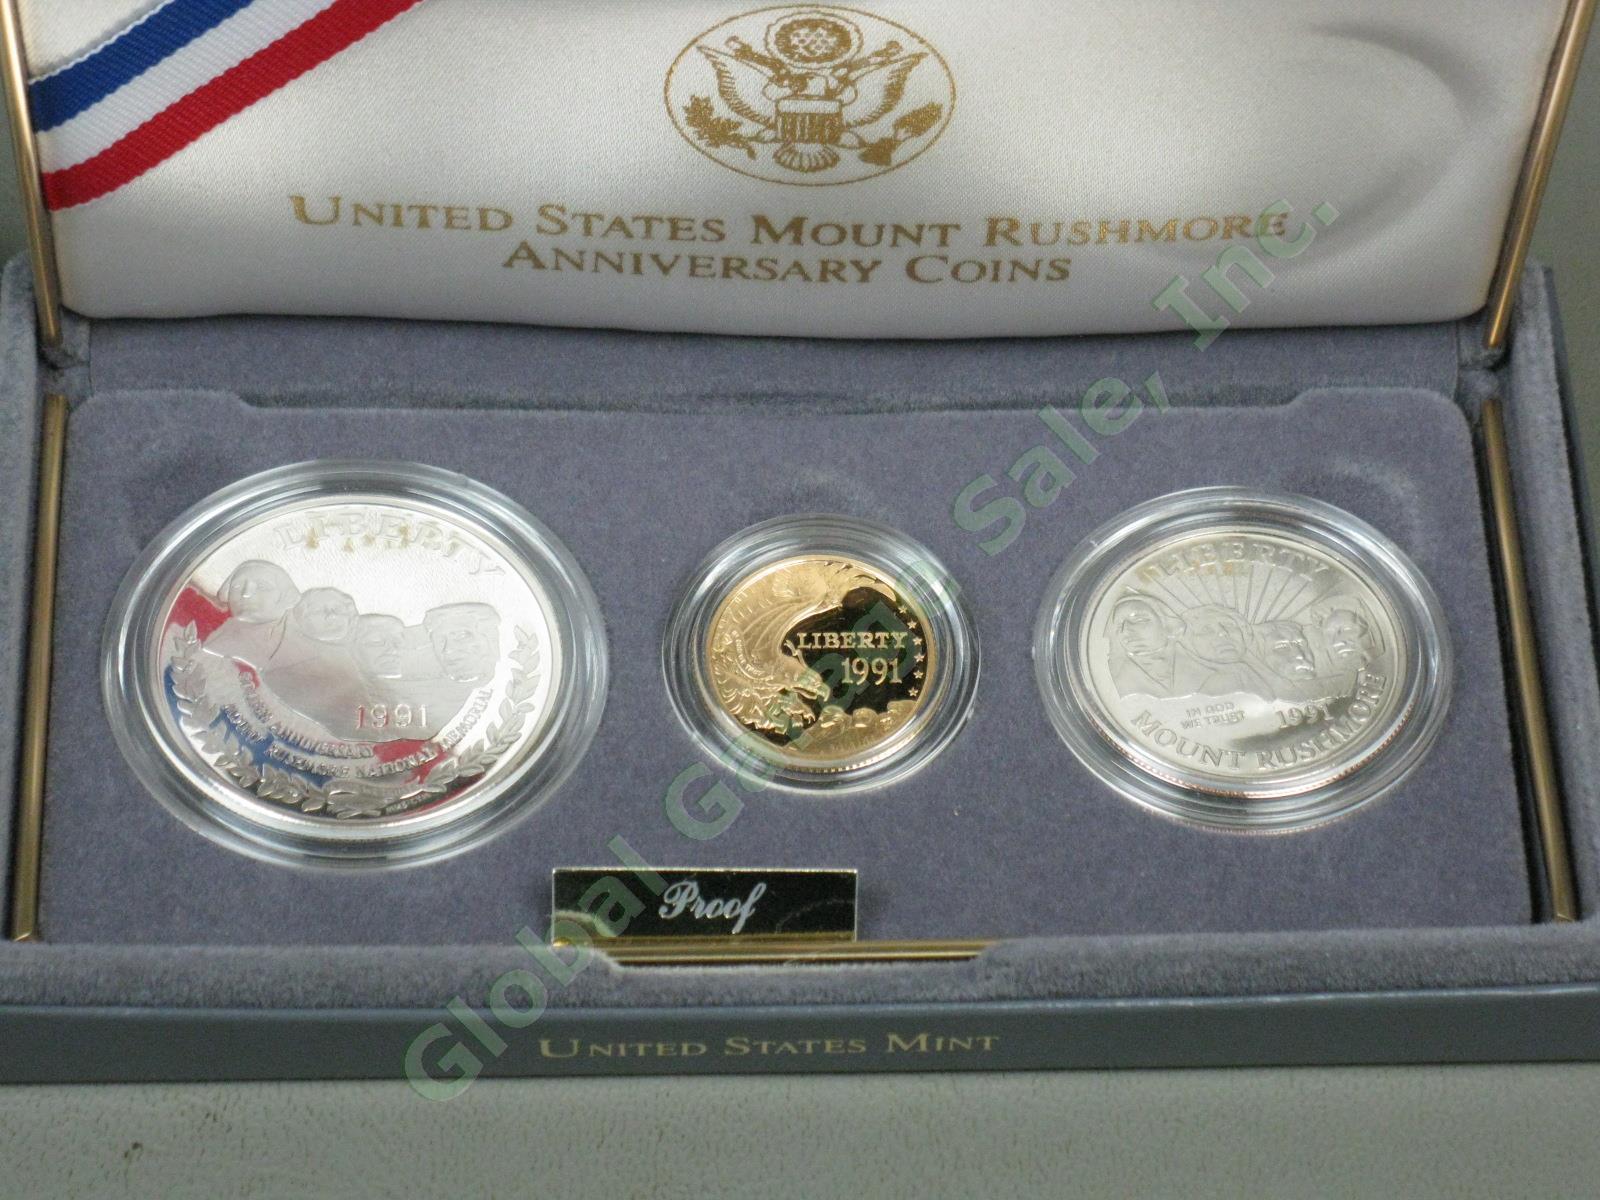 1991 US Mint Mount Rushmore 50th Anniversary 3-Coin UC Proof Set $5 Gold Silver 1